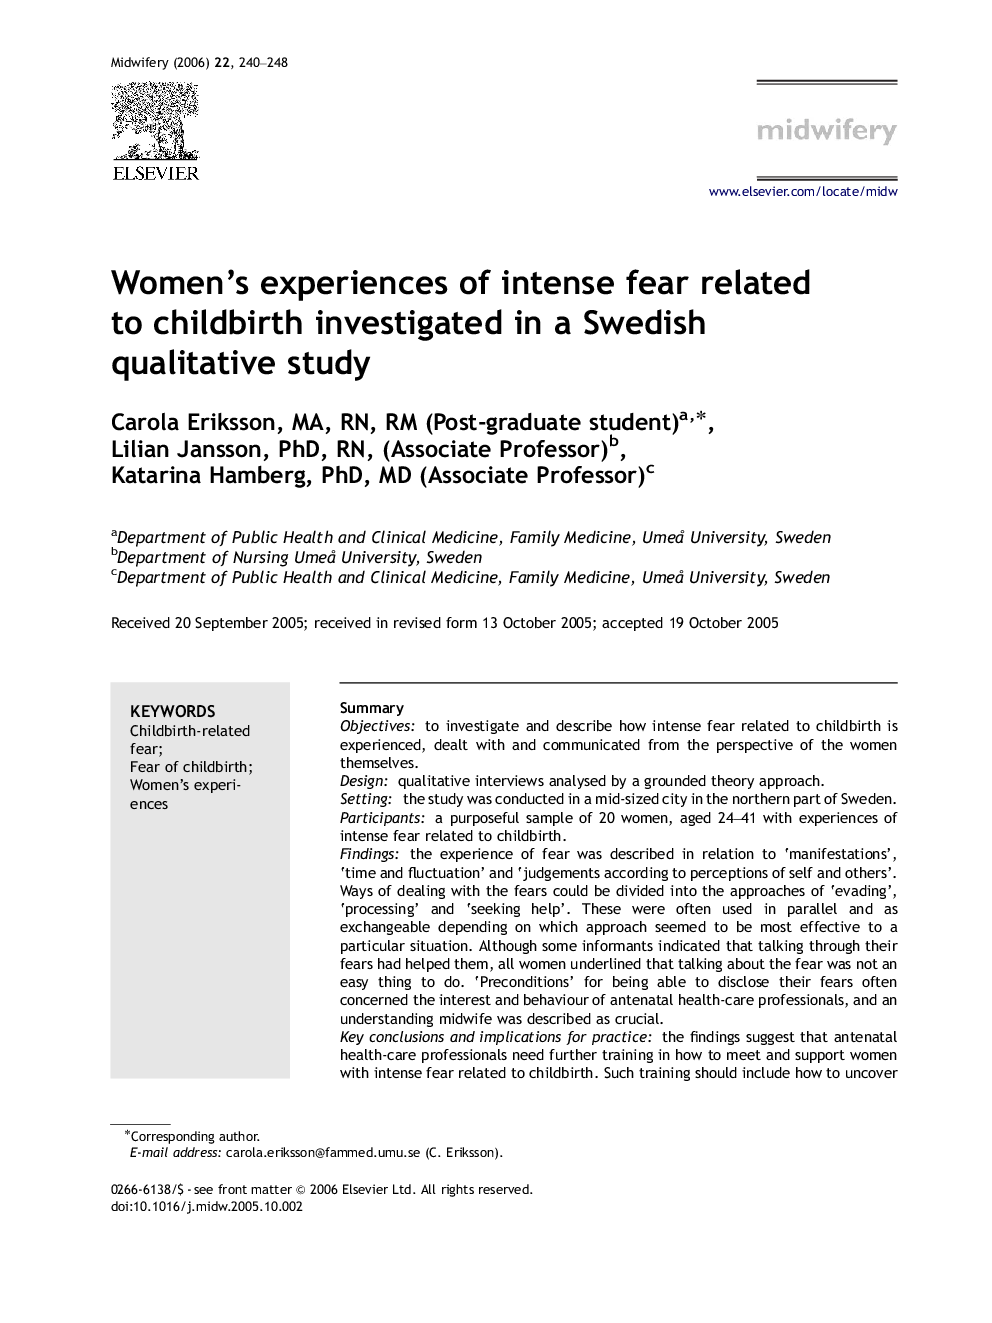 Women's experiences of intense fear related to childbirth investigated in a Swedish qualitative study